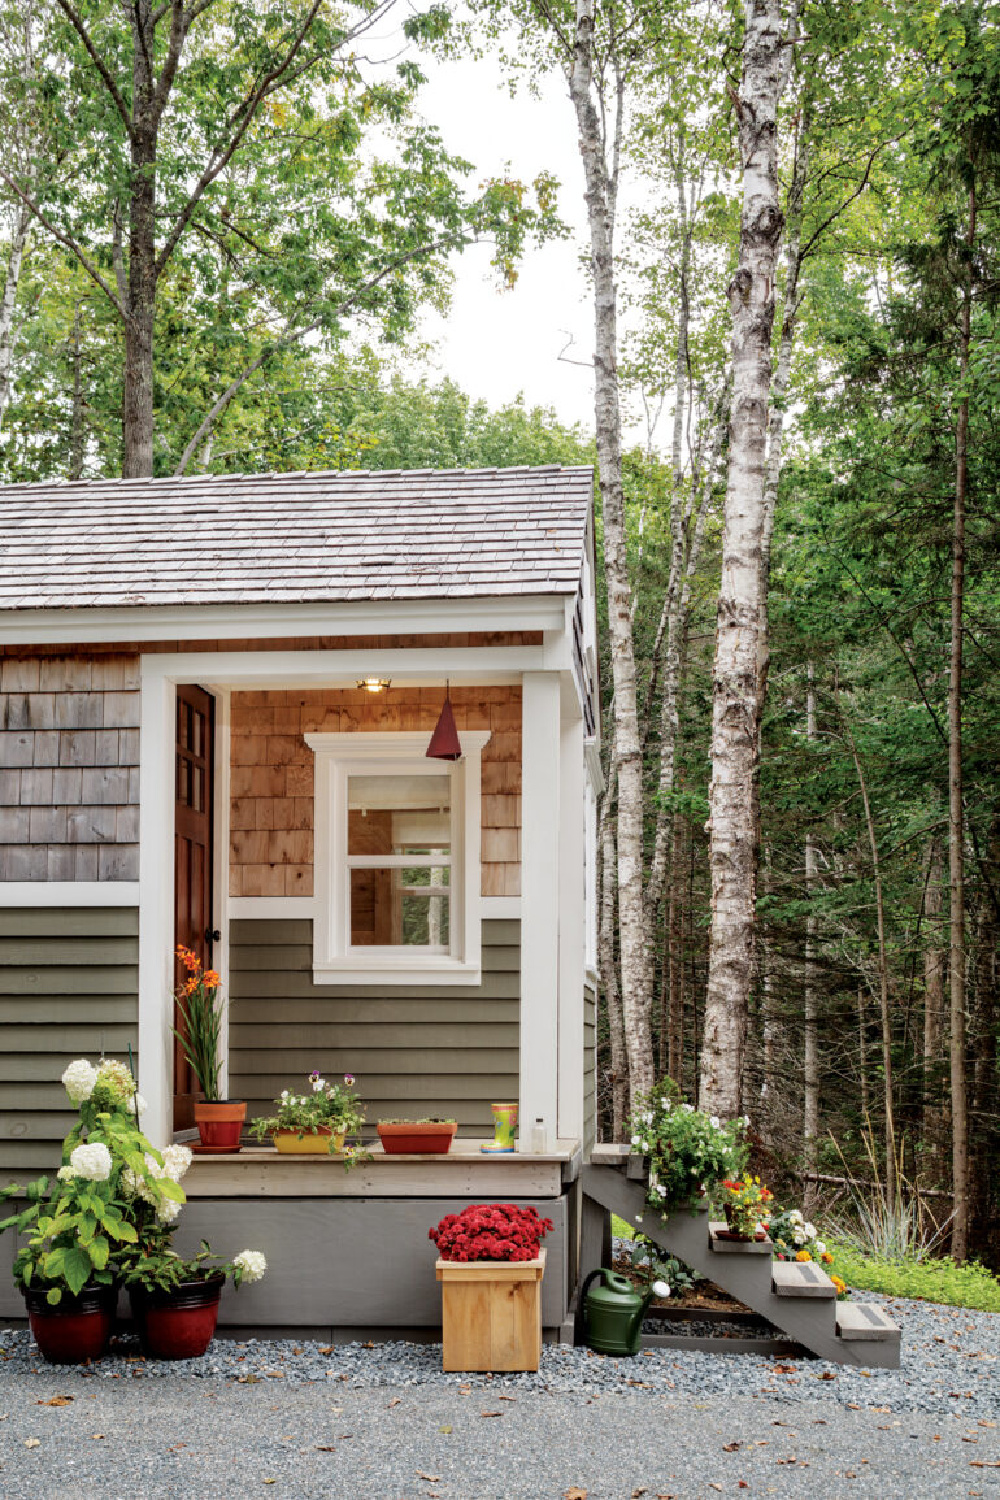 Cedar shake shingles accent a tiny house cottage exterior in Maine - @downeast. #tinyhouseliving #tinyhousearchitecture